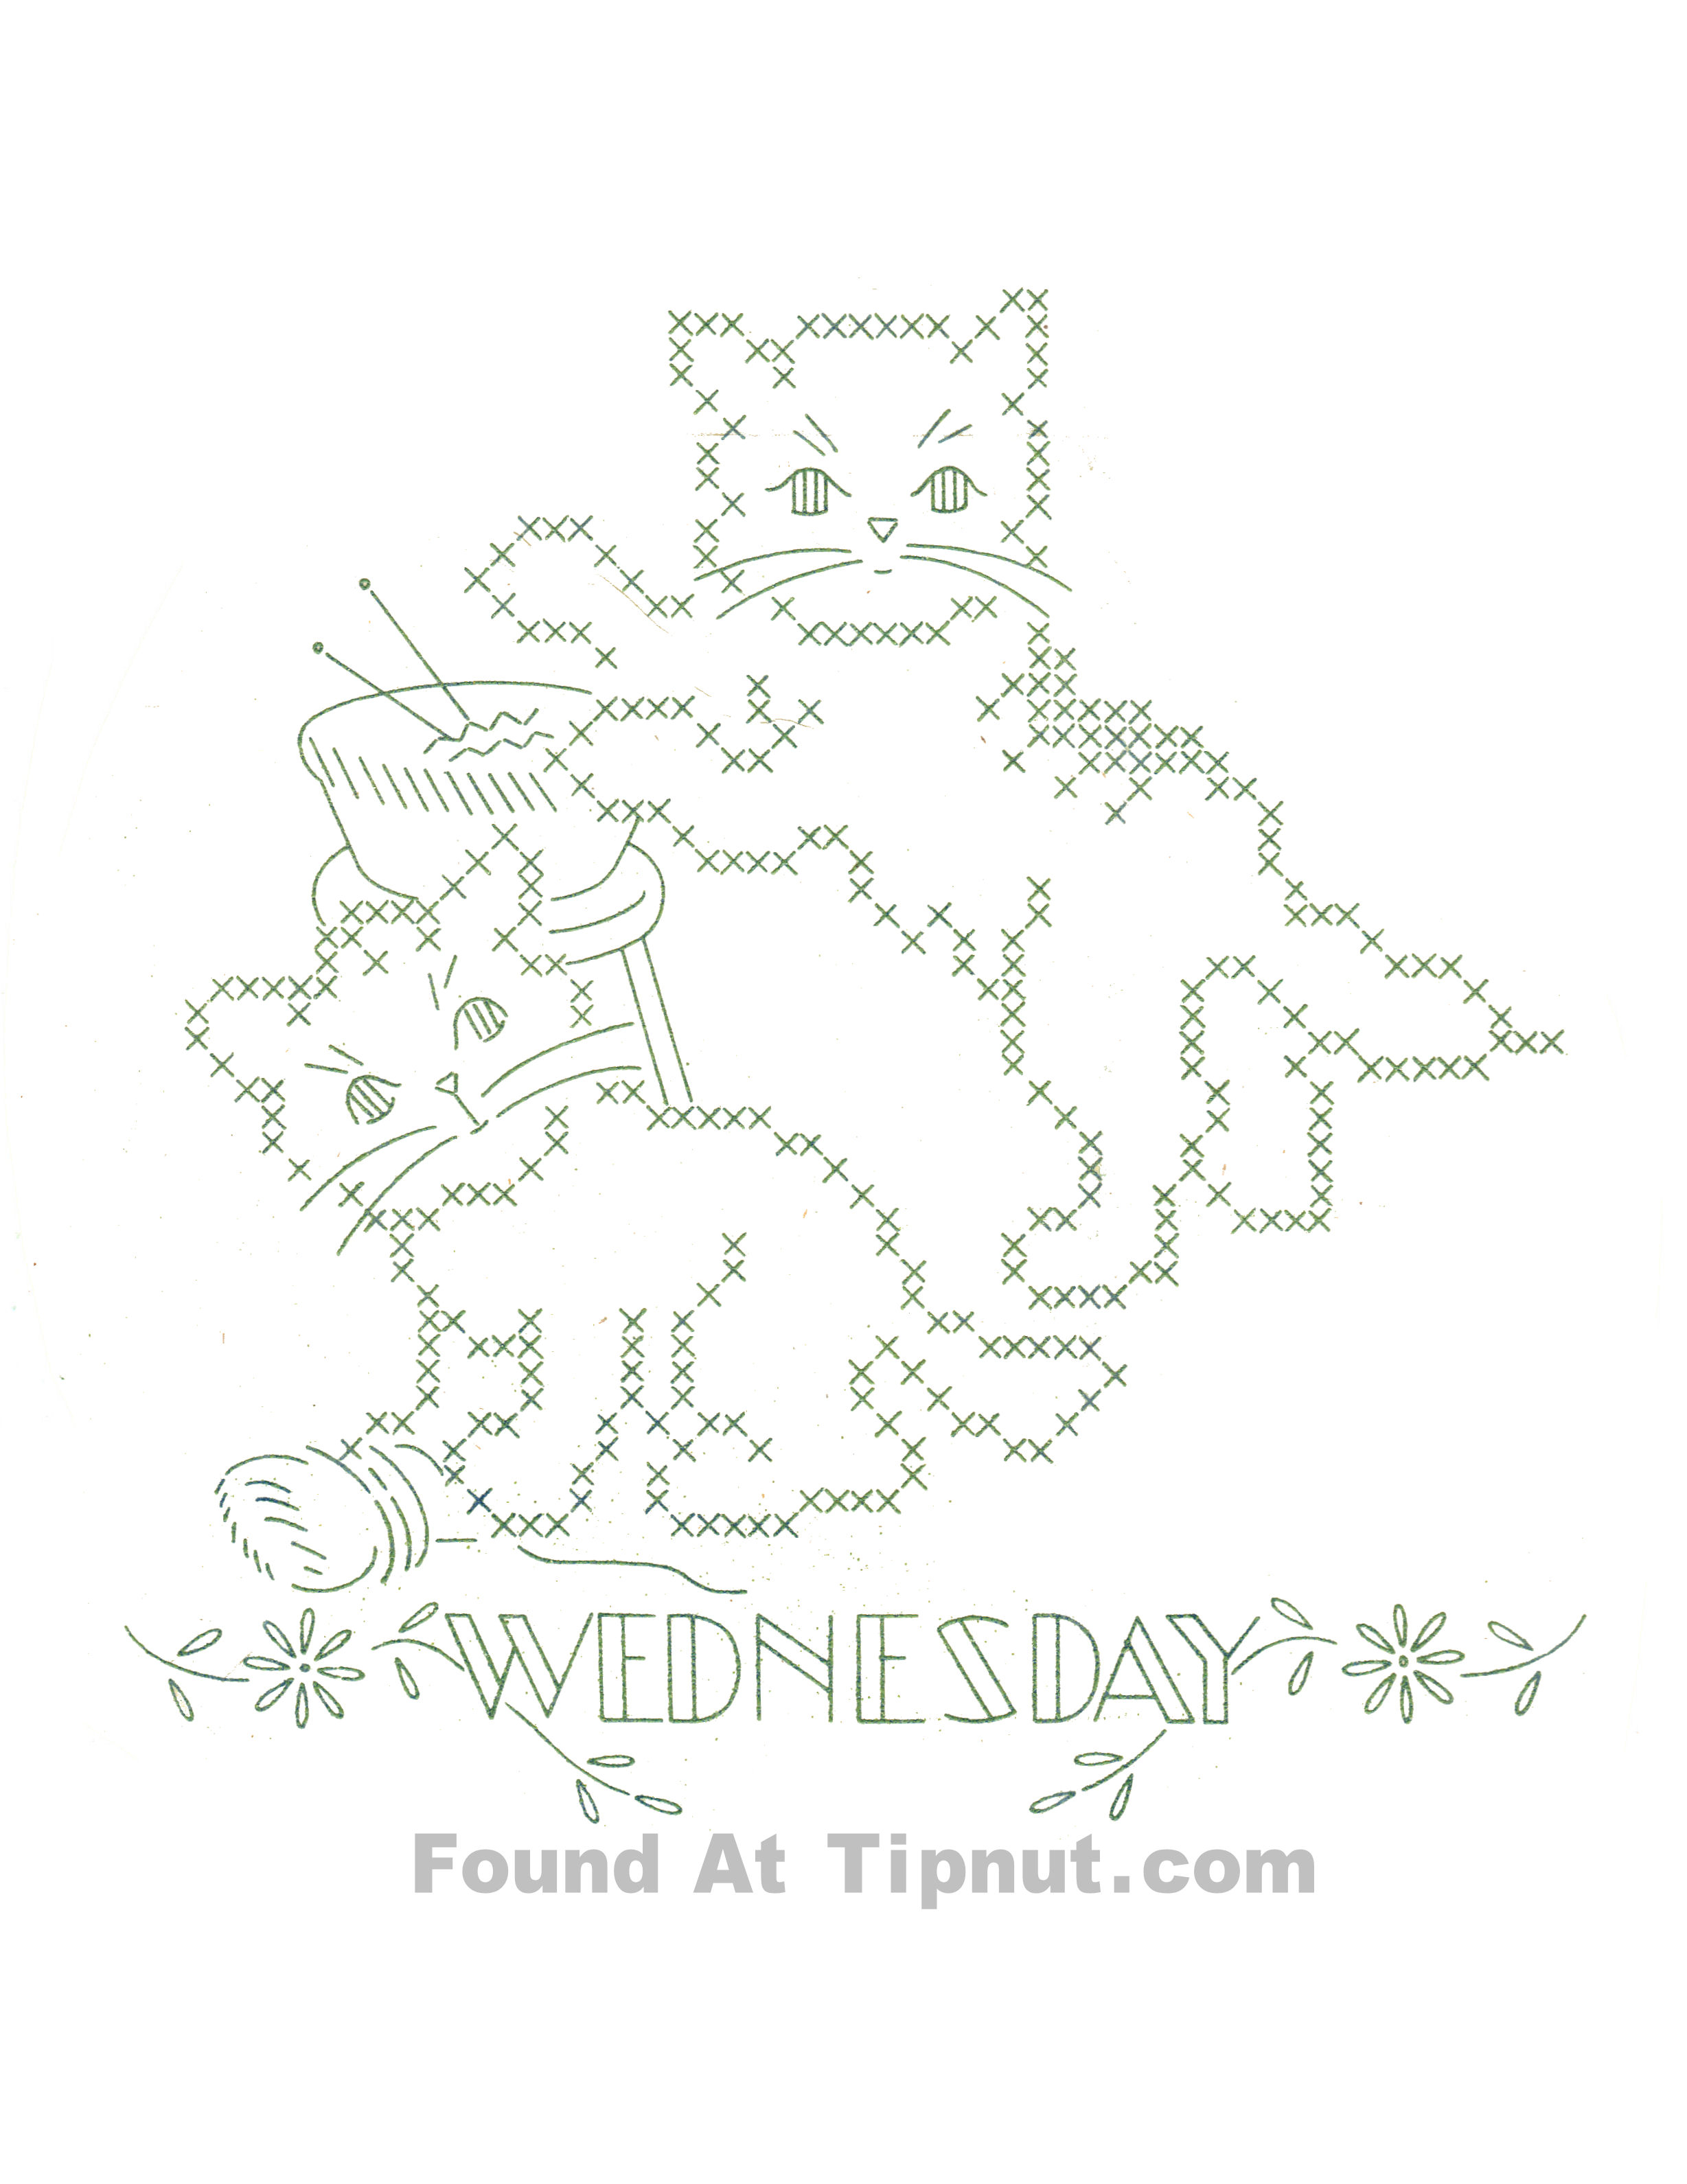 Free Vintage Embroidery Patterns Download Vintage Kitten Towels Pattern Set Vintage Embroidery Tipnut